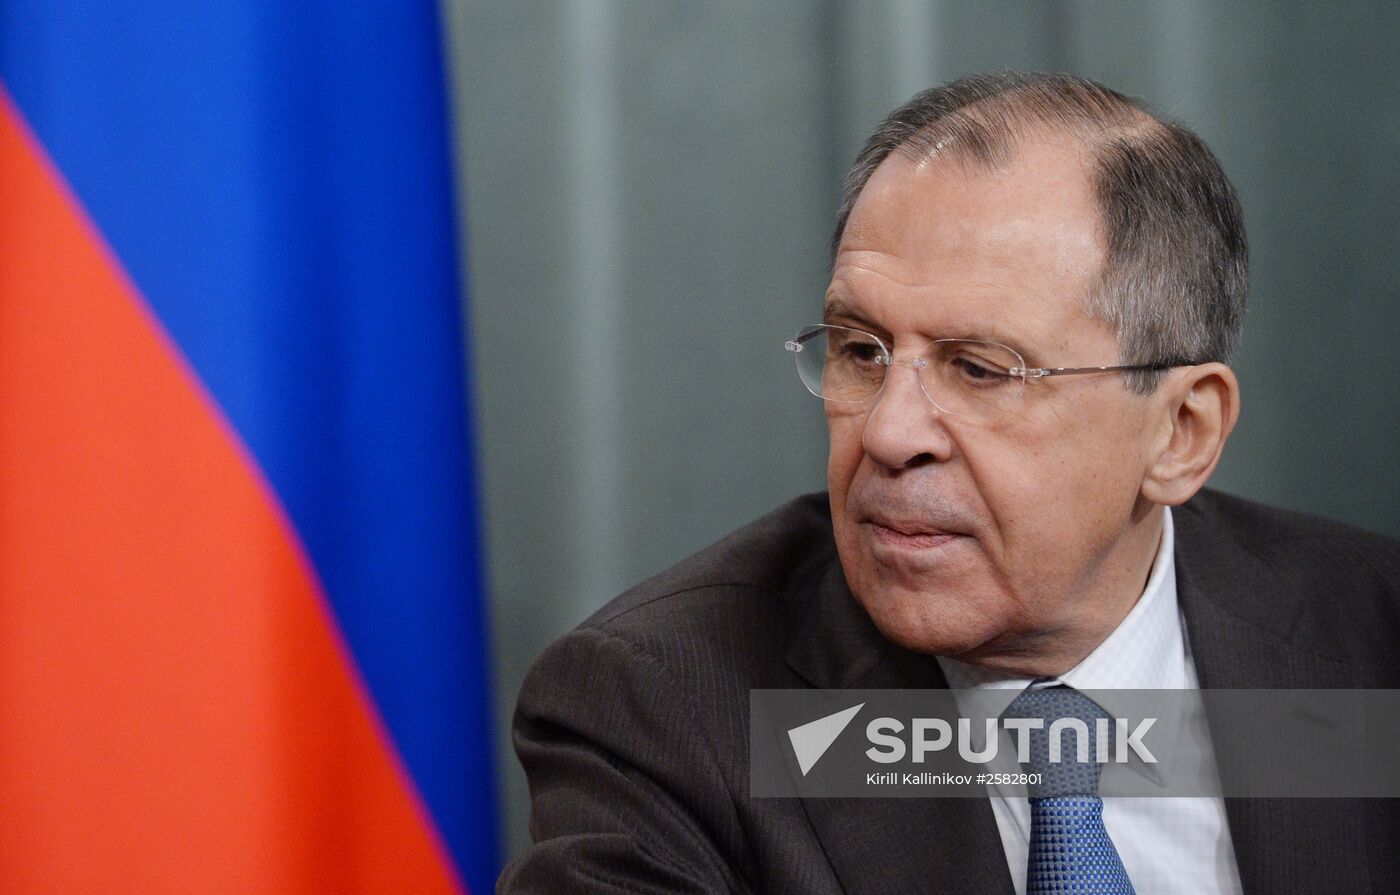 Foreign Minister Sergey Lavrov meets with Foreign Minister of Cambodia Hor Namhong